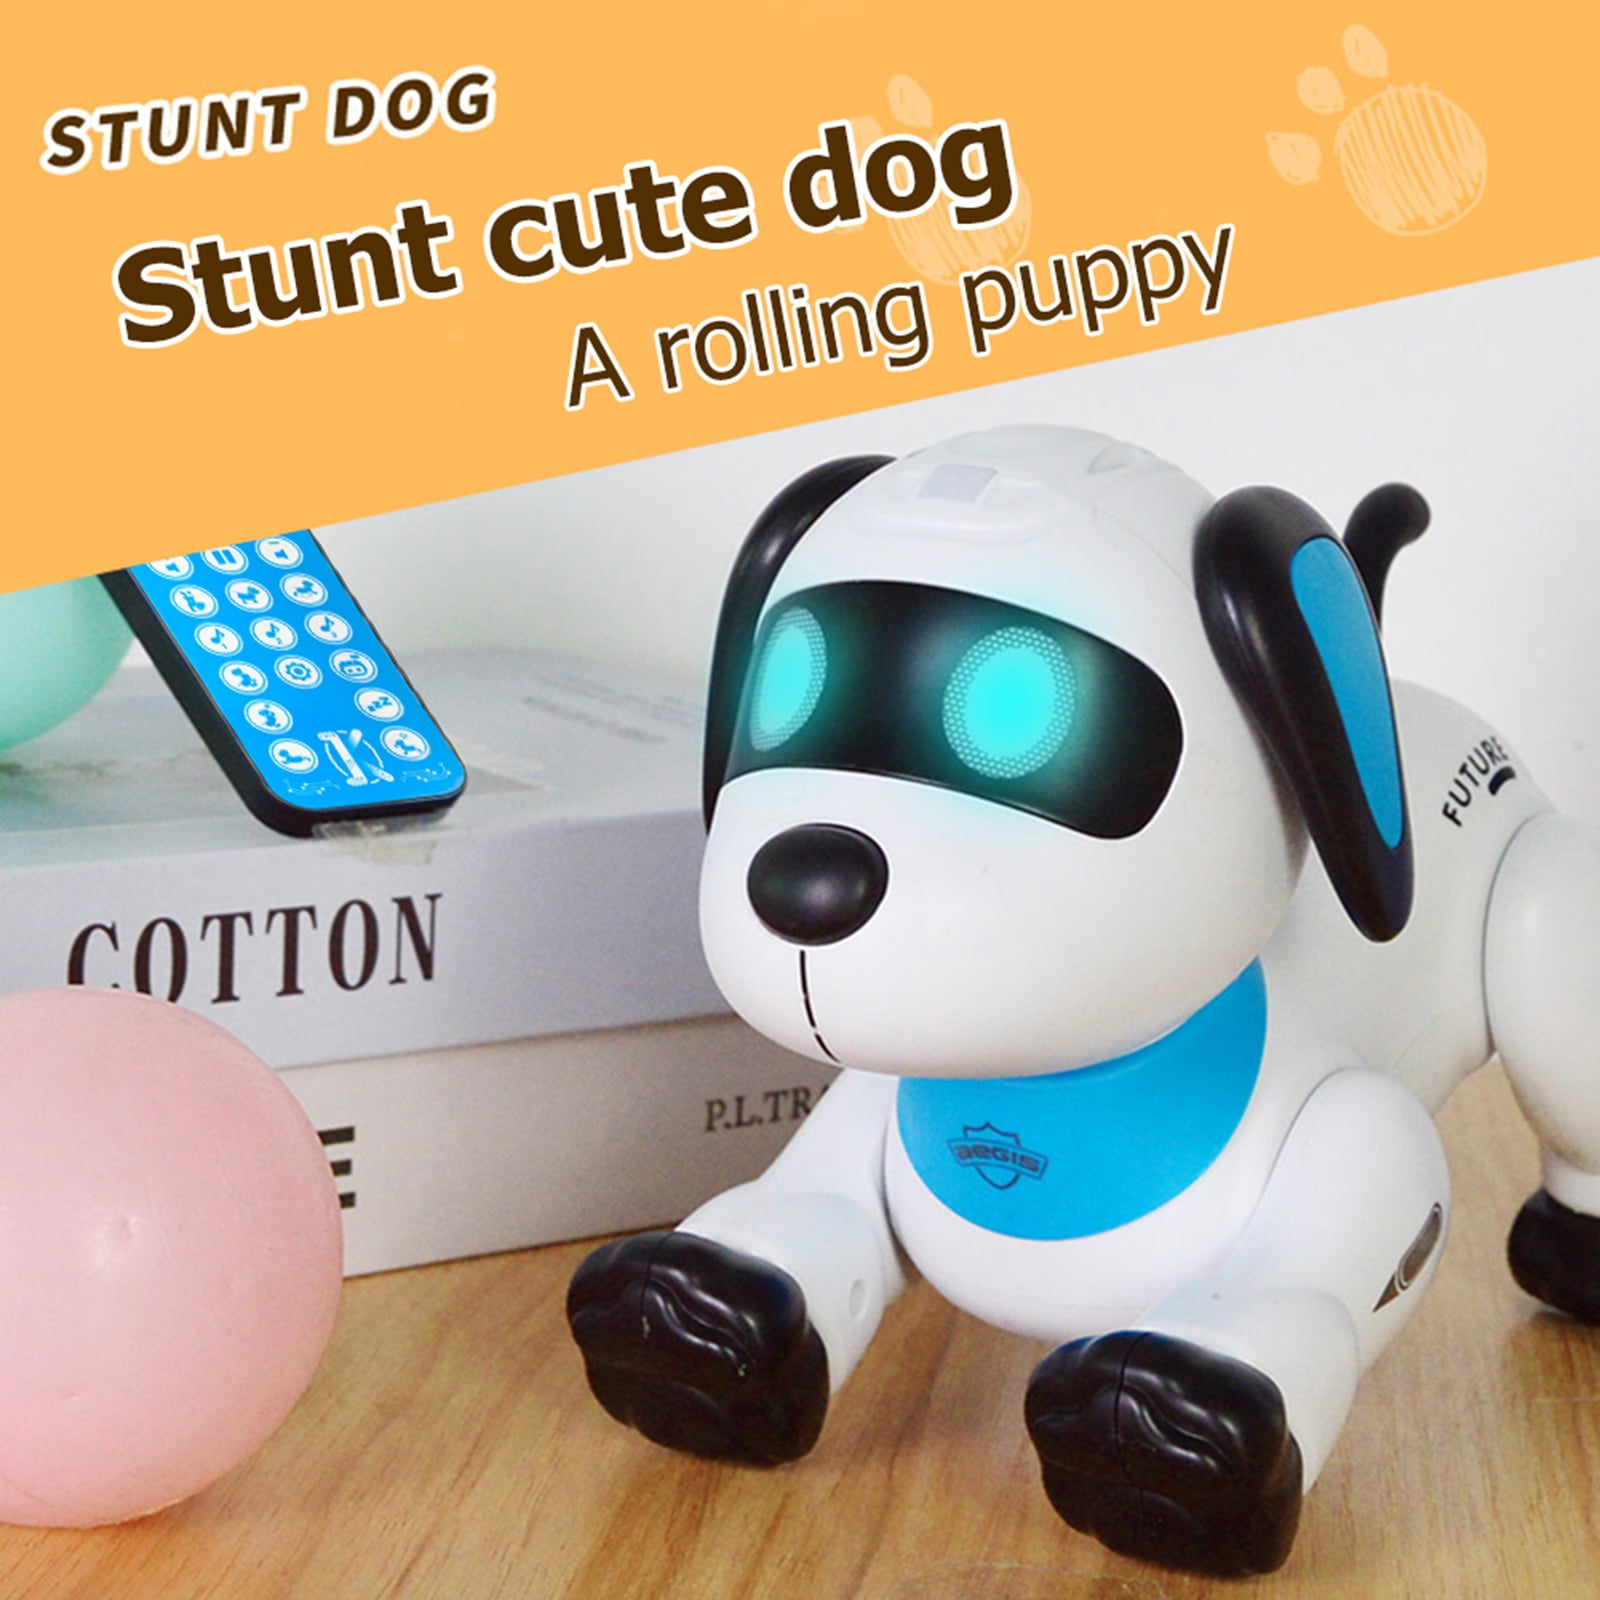 Robot Dog for Kid, Wireless Puppy Interactive Smart Toy, Educational  Electronic Robotic Pet Dog That Walk, Bark, Sing, Dance for Kids Boys and  Girls